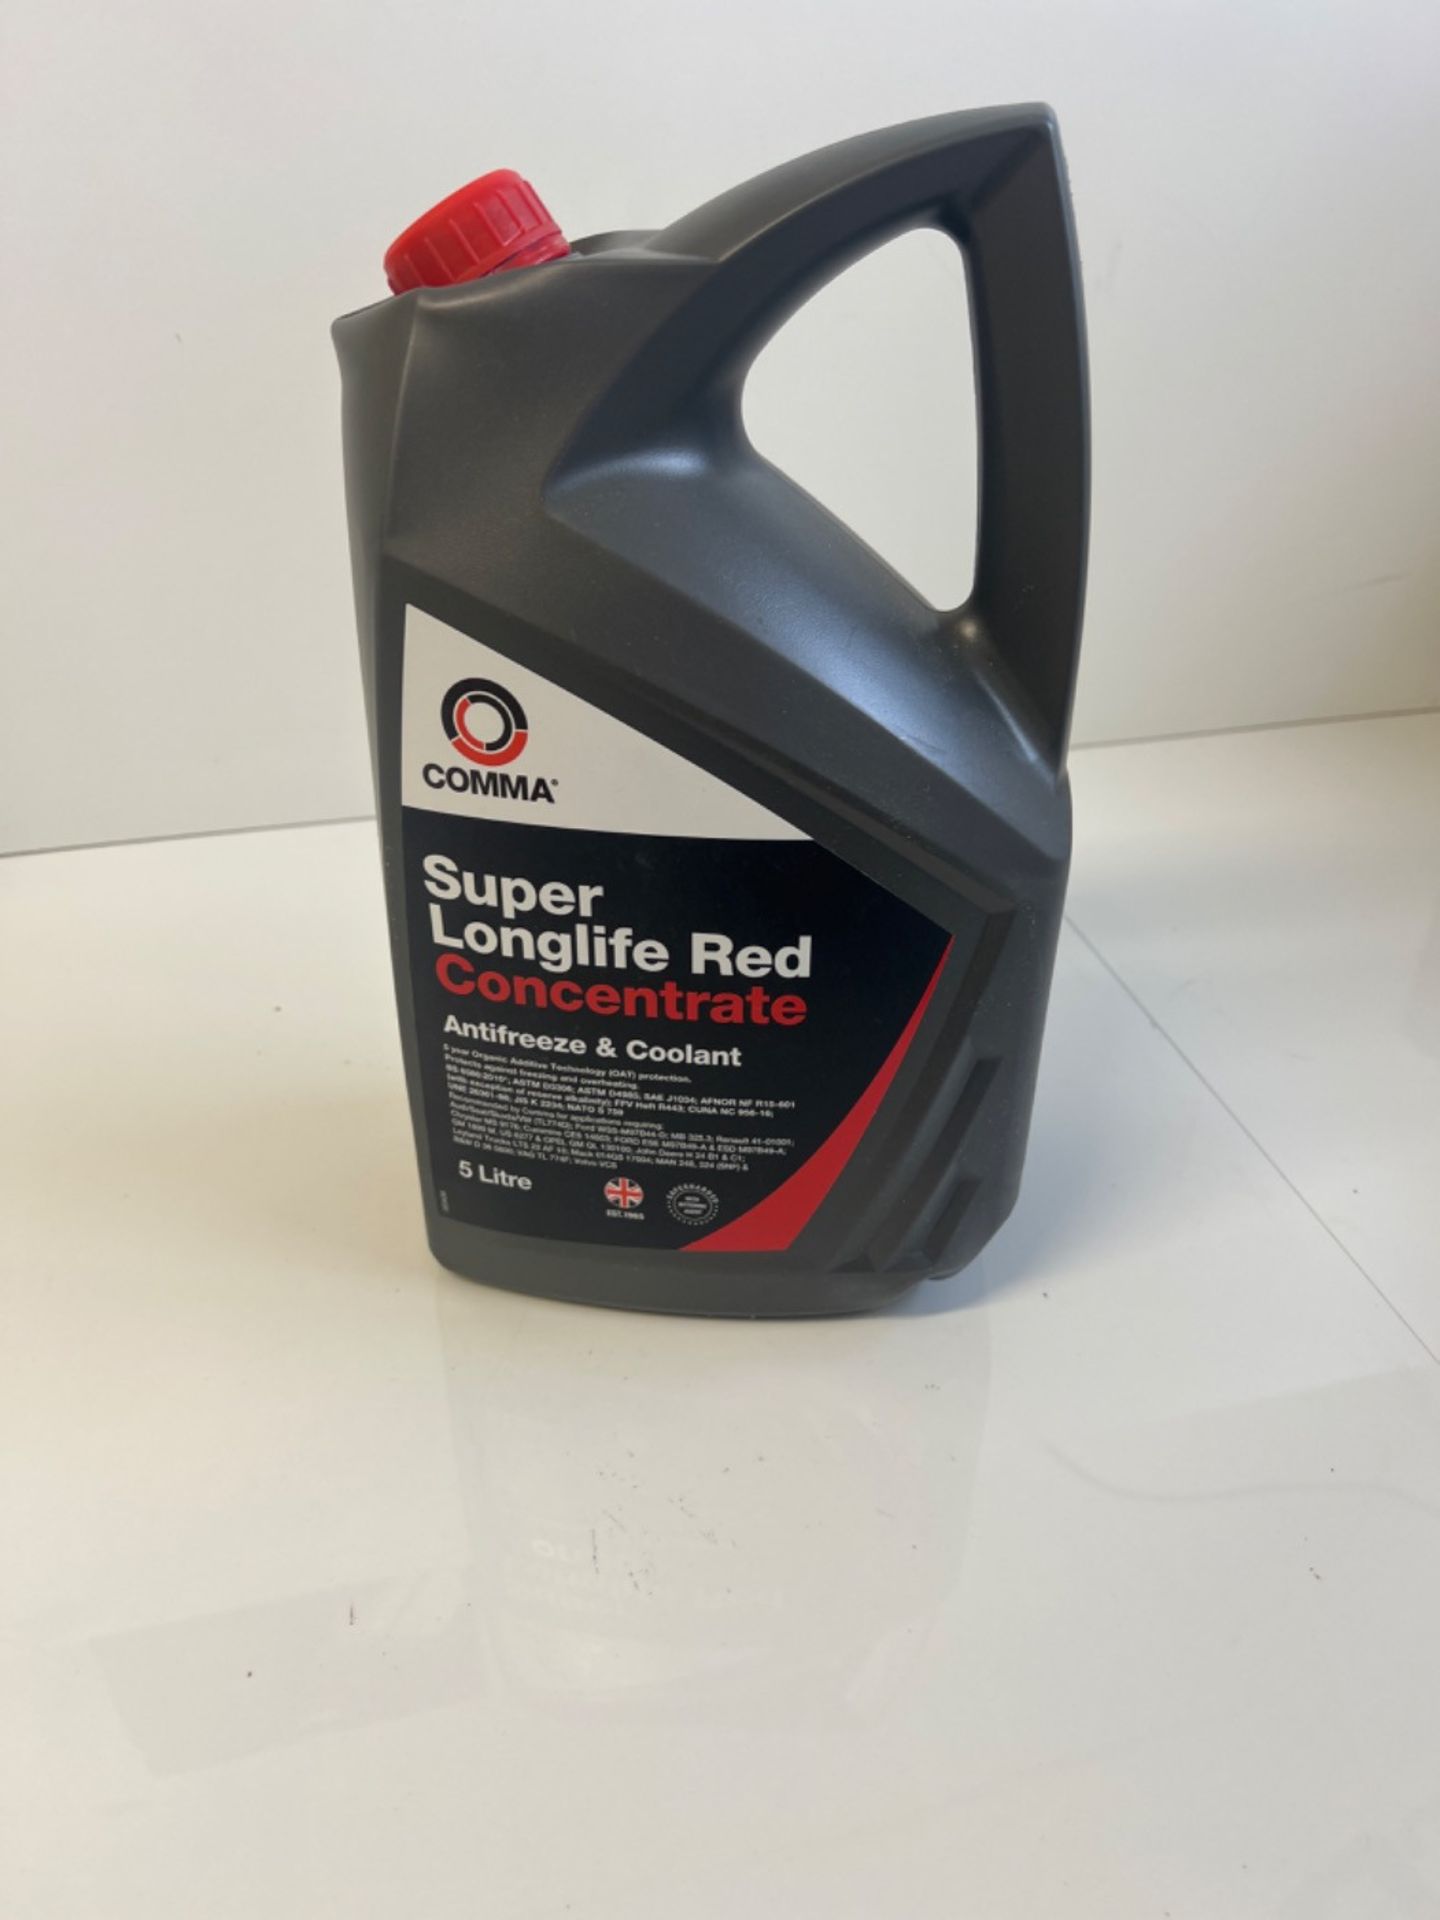 Comma SLA5L Super Red Antifreeze and Coolant Concentrated, 5 Litre